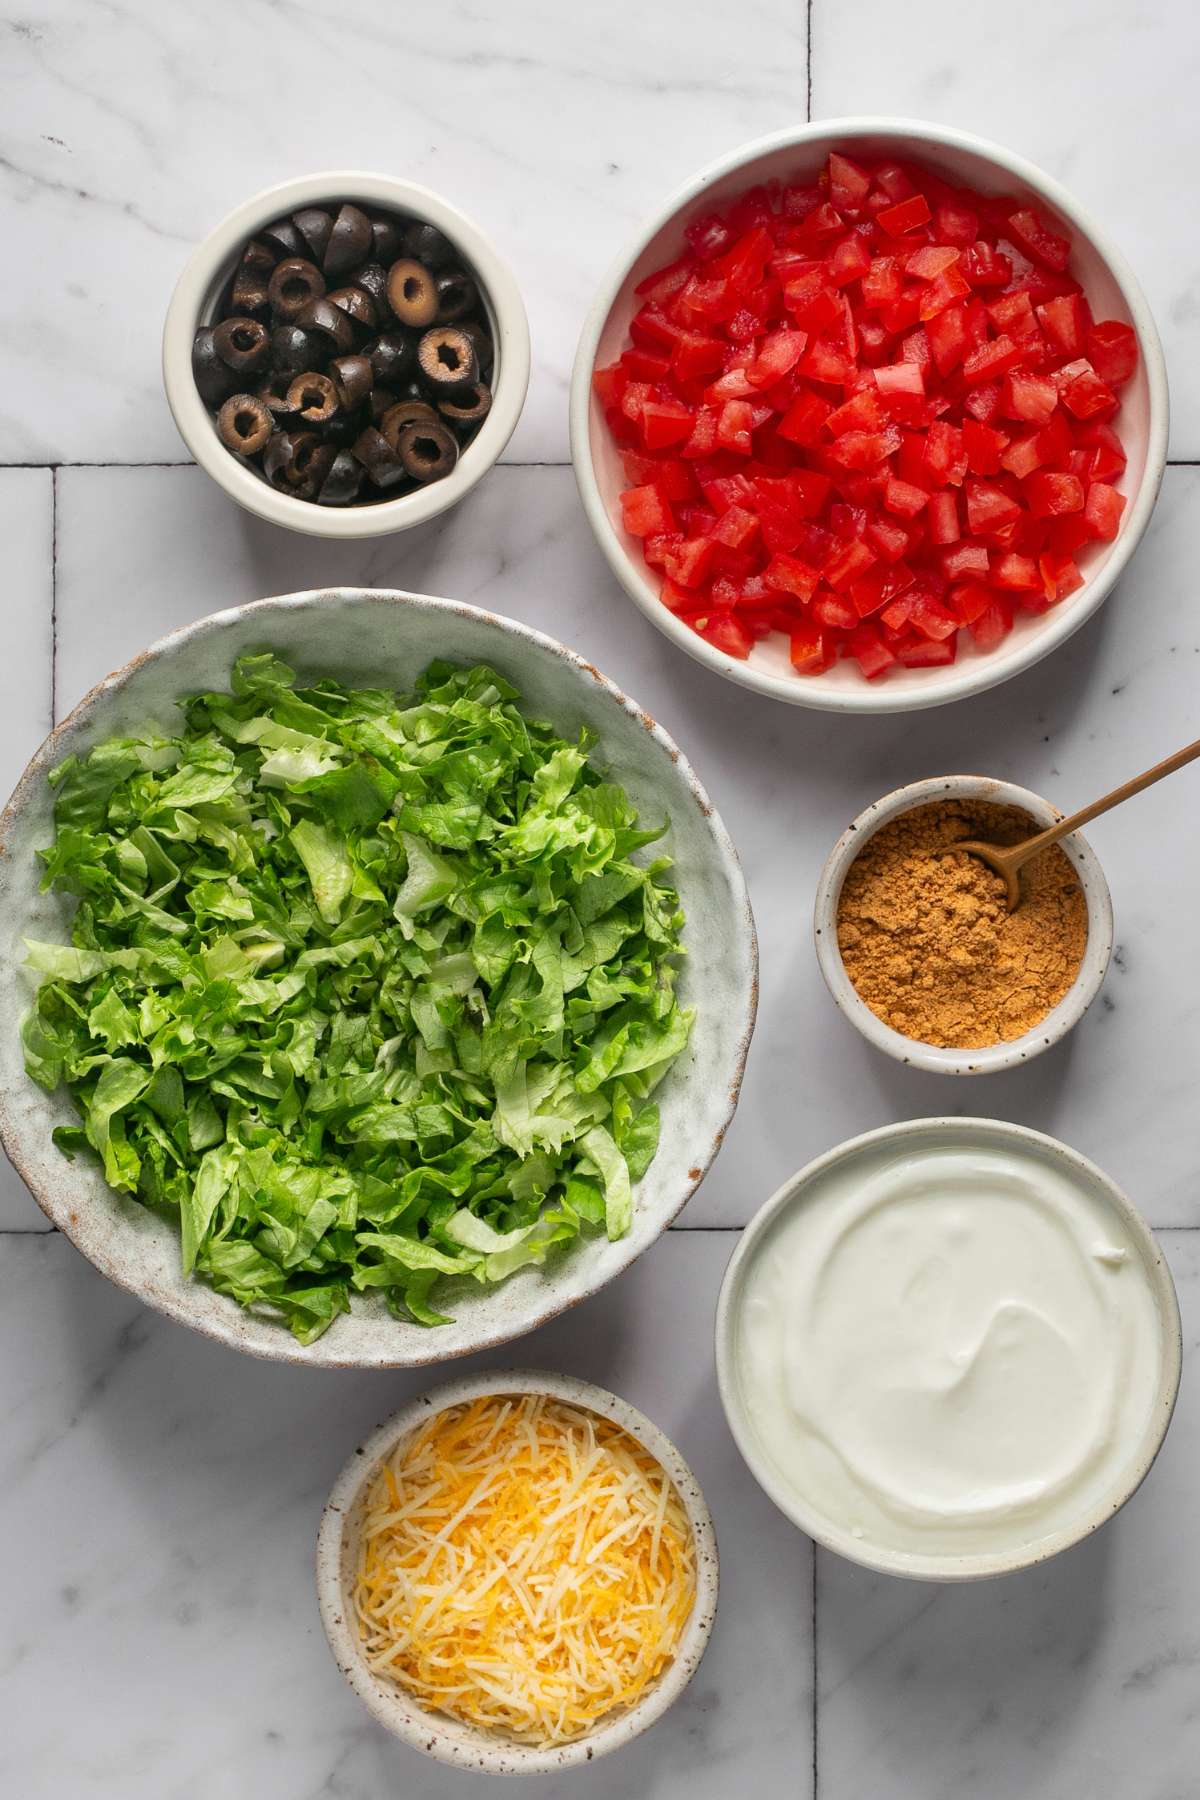 Ingredients to make taco dip on the table before mixing.